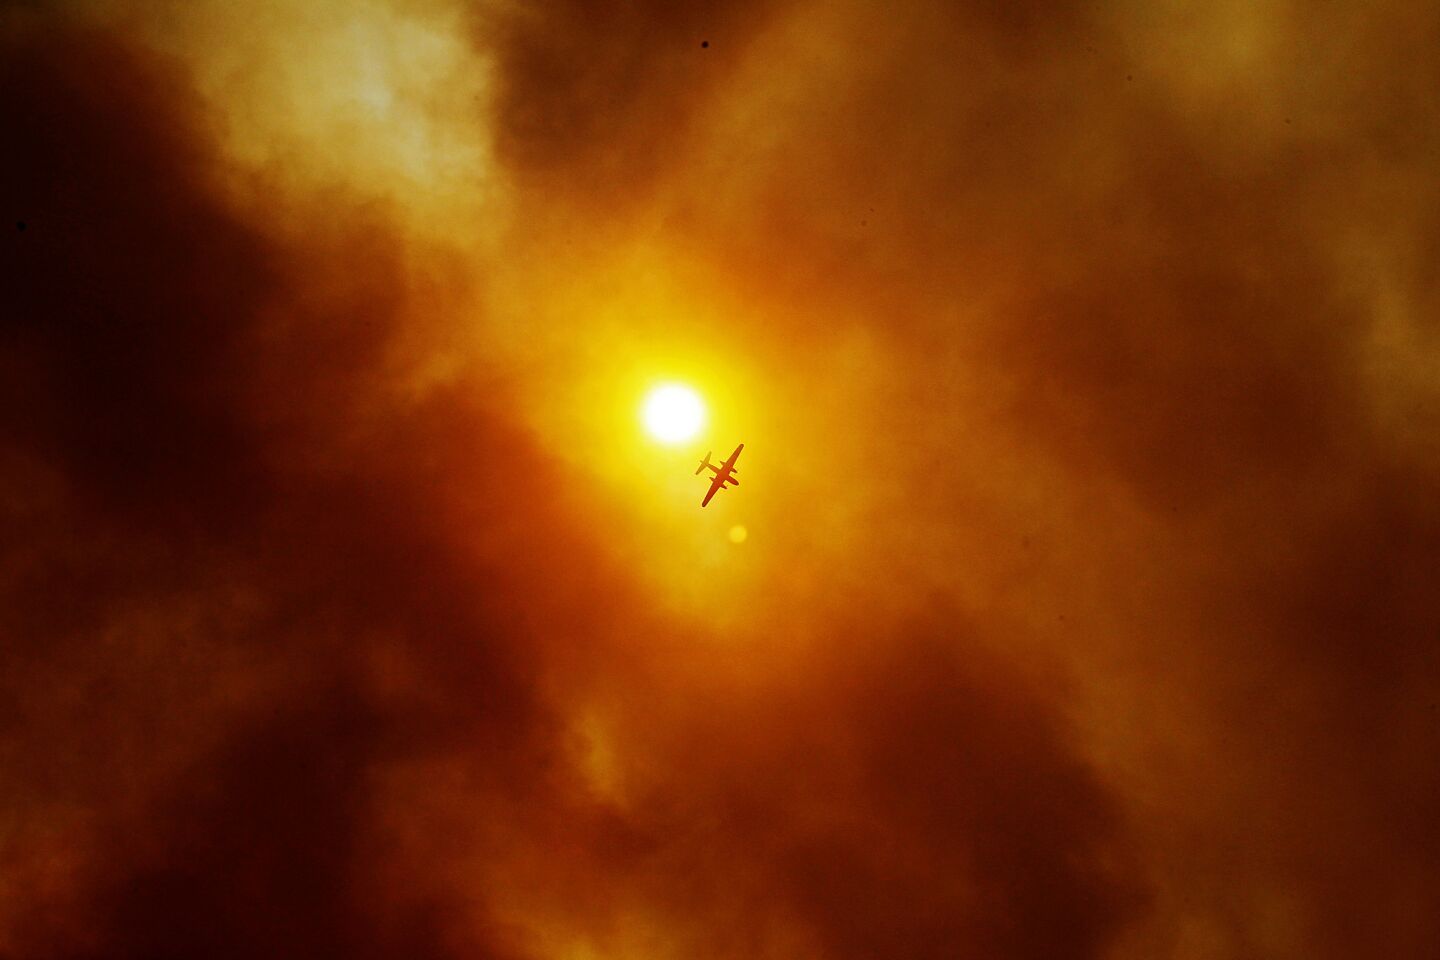 Thick smoke nearly obscures the sun above San Marcos, where the wildfire continues to burn.